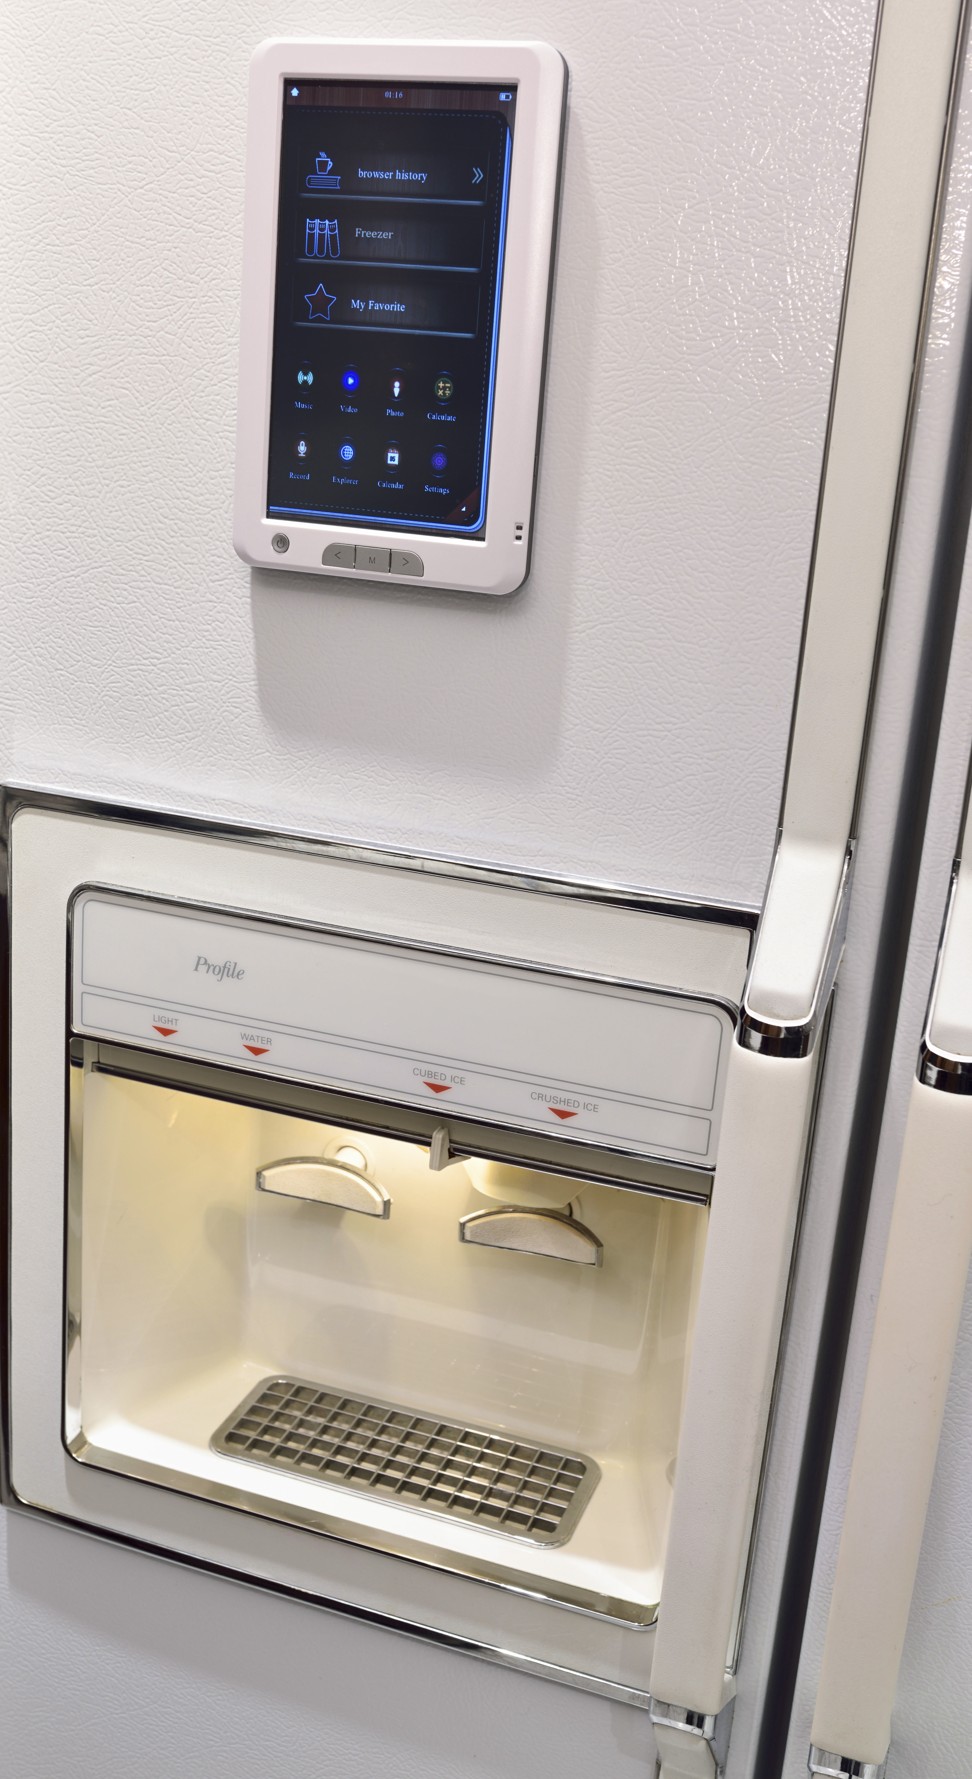 Internet of Things connected household items such as this smart refrigerator could be vulnerable to cyberattack.